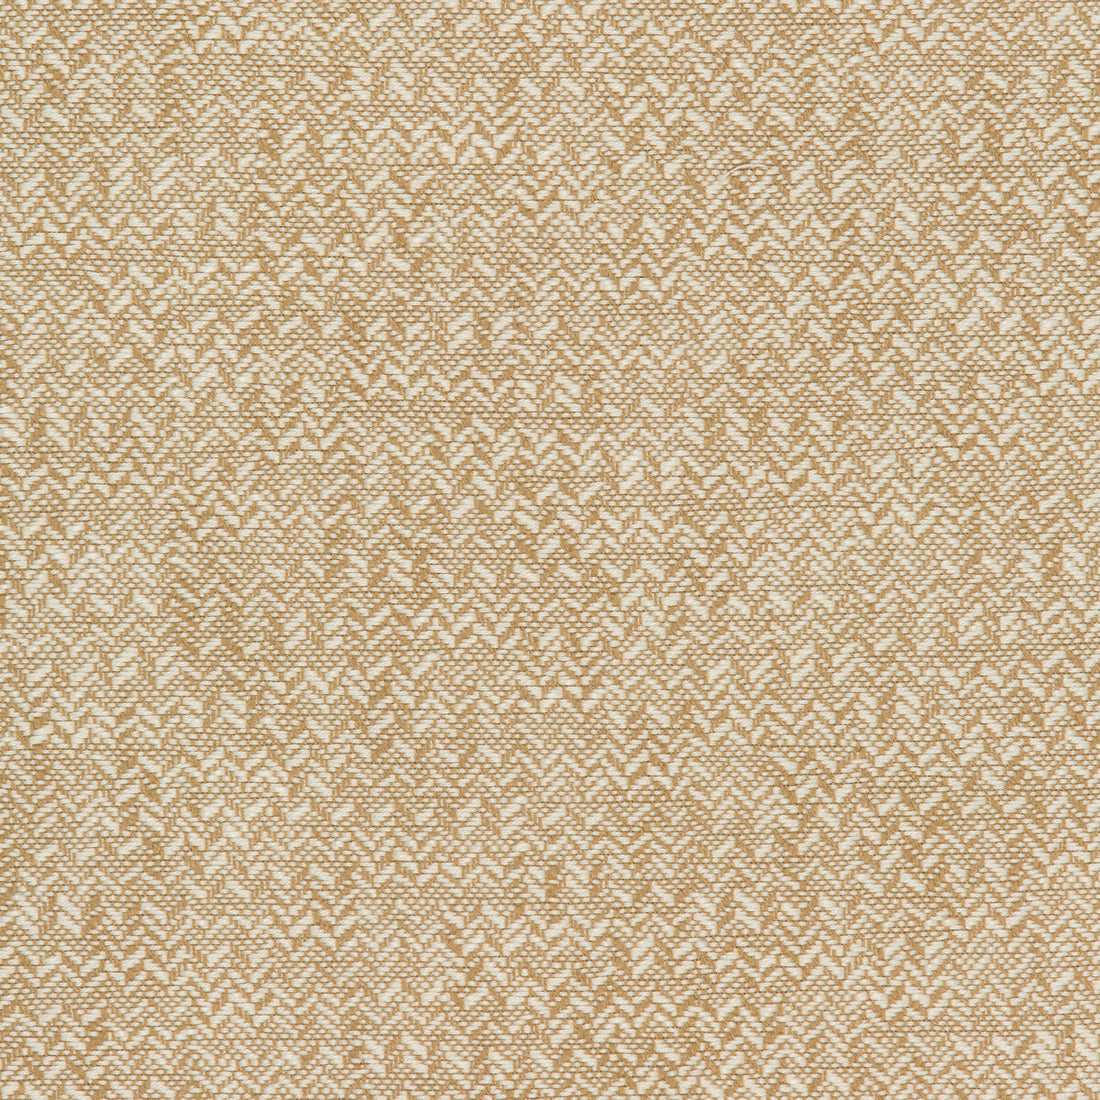 Kravet Design fabric in 36089-16 color - pattern 36089.16.0 - by Kravet Design in the Inside Out Performance Fabrics collection